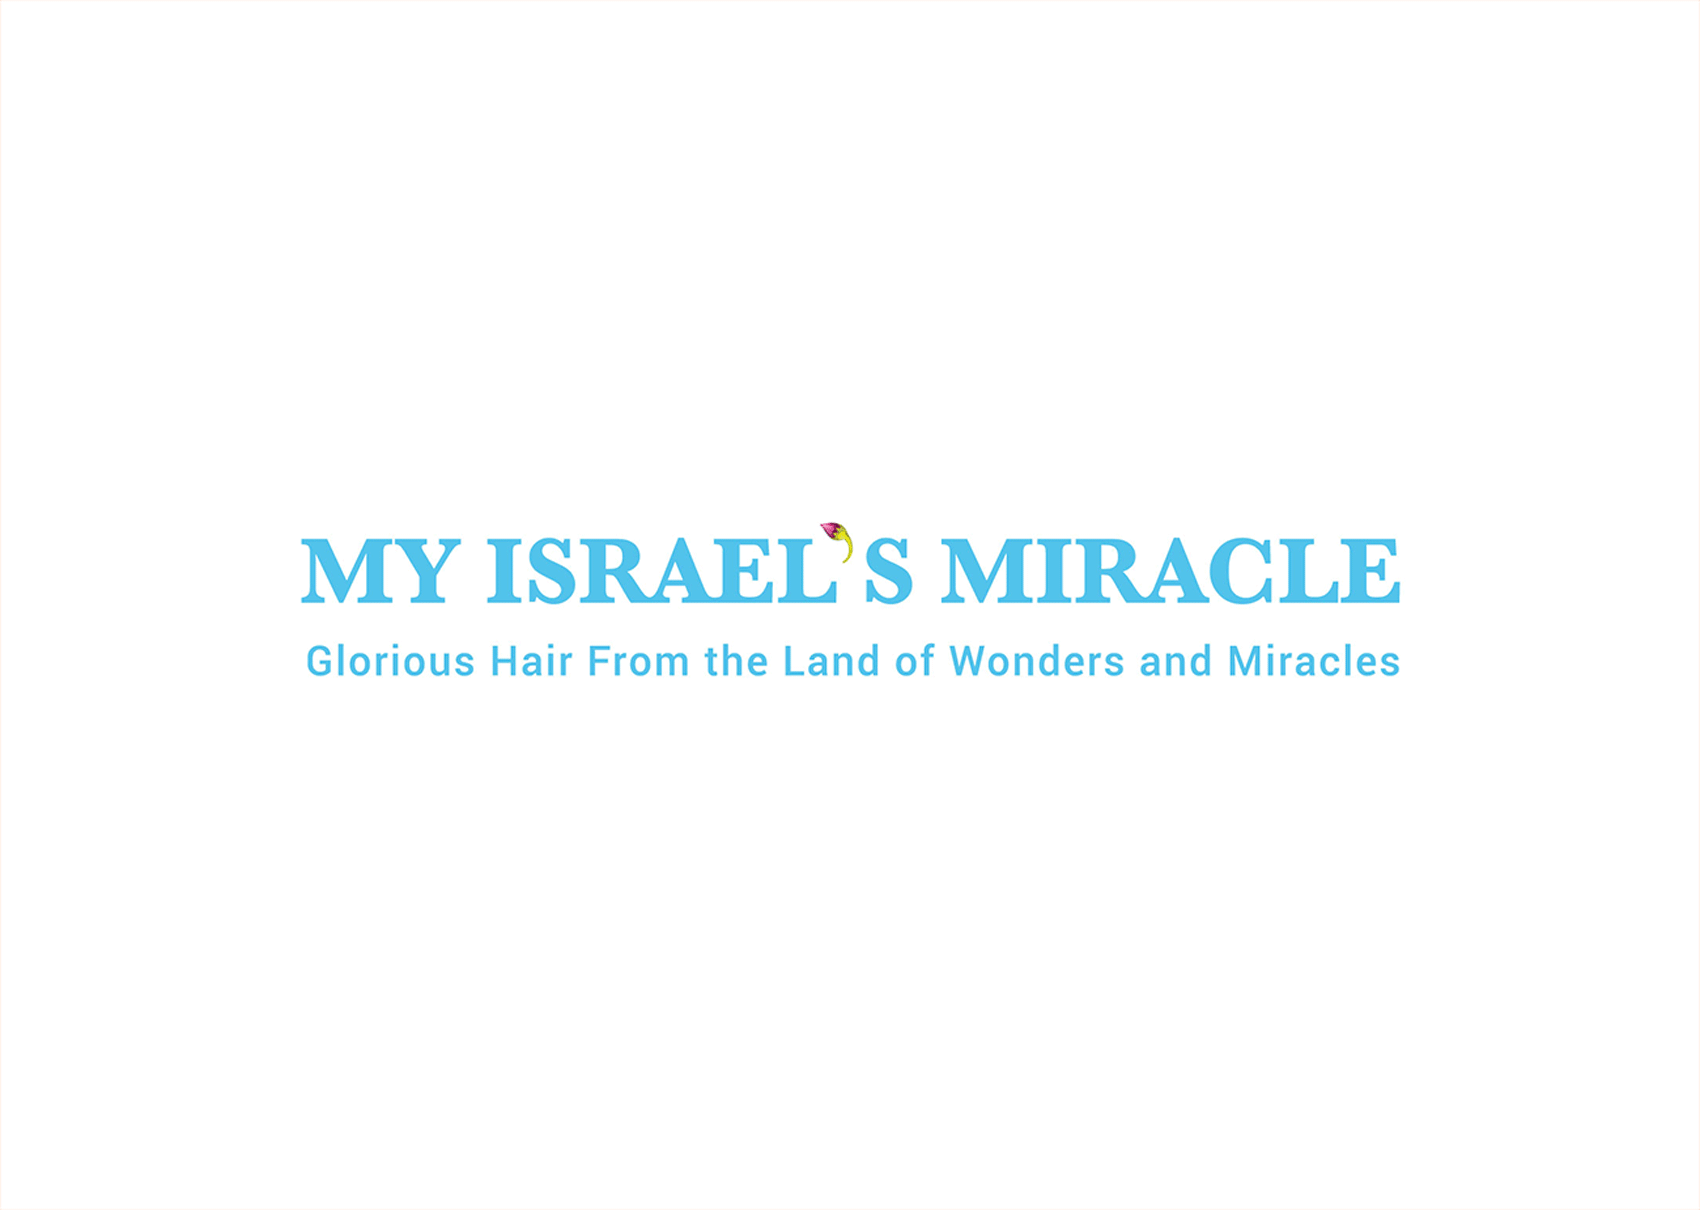 My Israel's Miracle Brand Design and Development